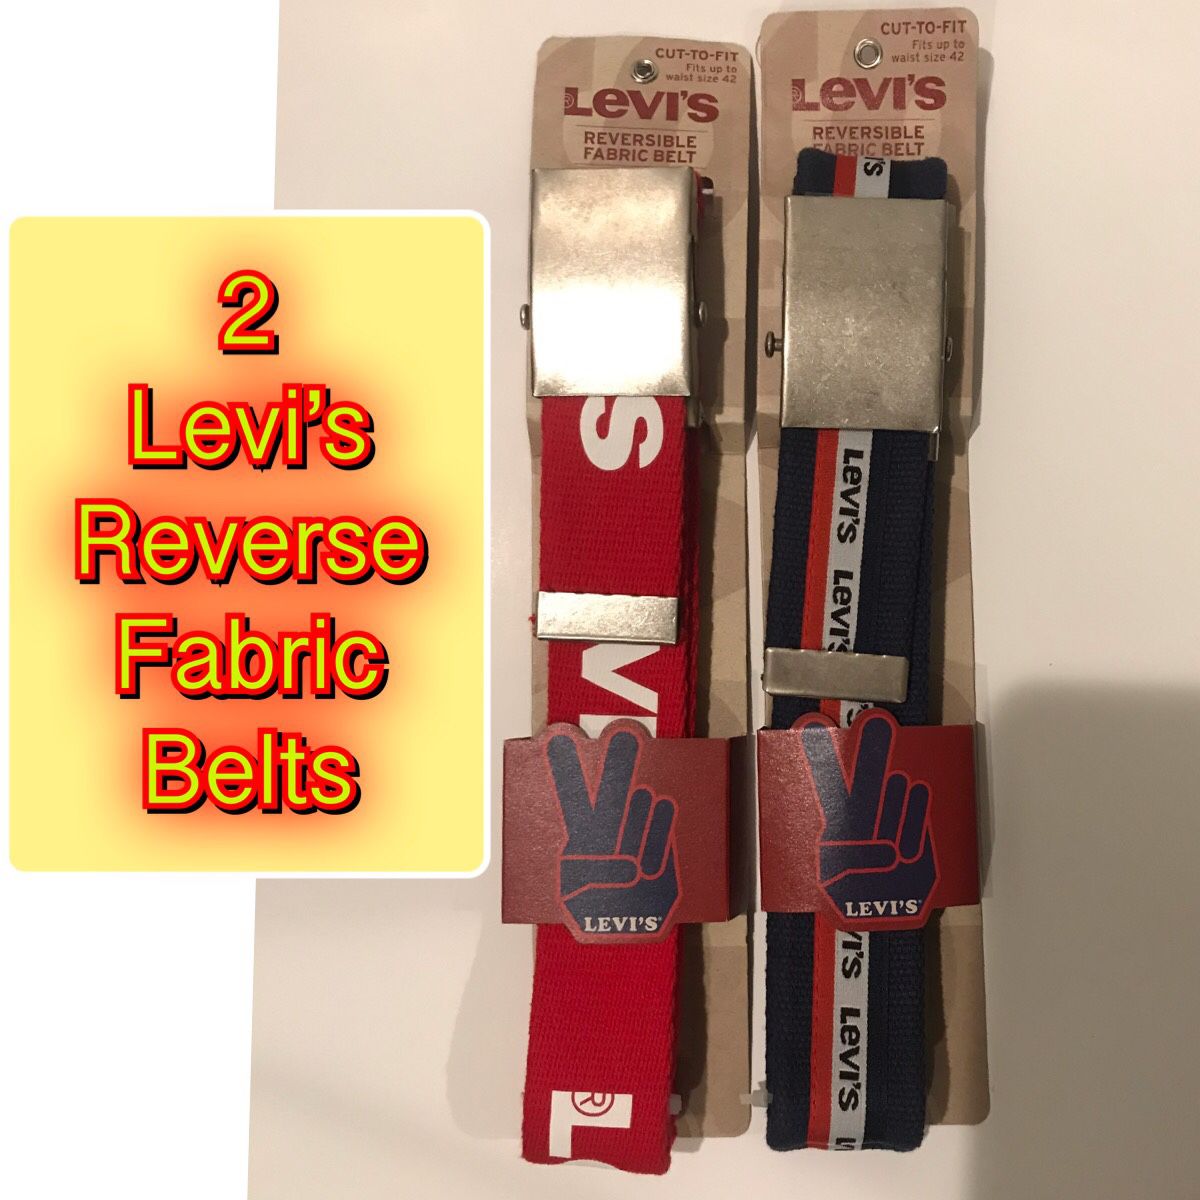 Brand New Levi’s Belts 2 Reversible fabric Belts pick up Tinton Falls NJ or shipping available through offer up